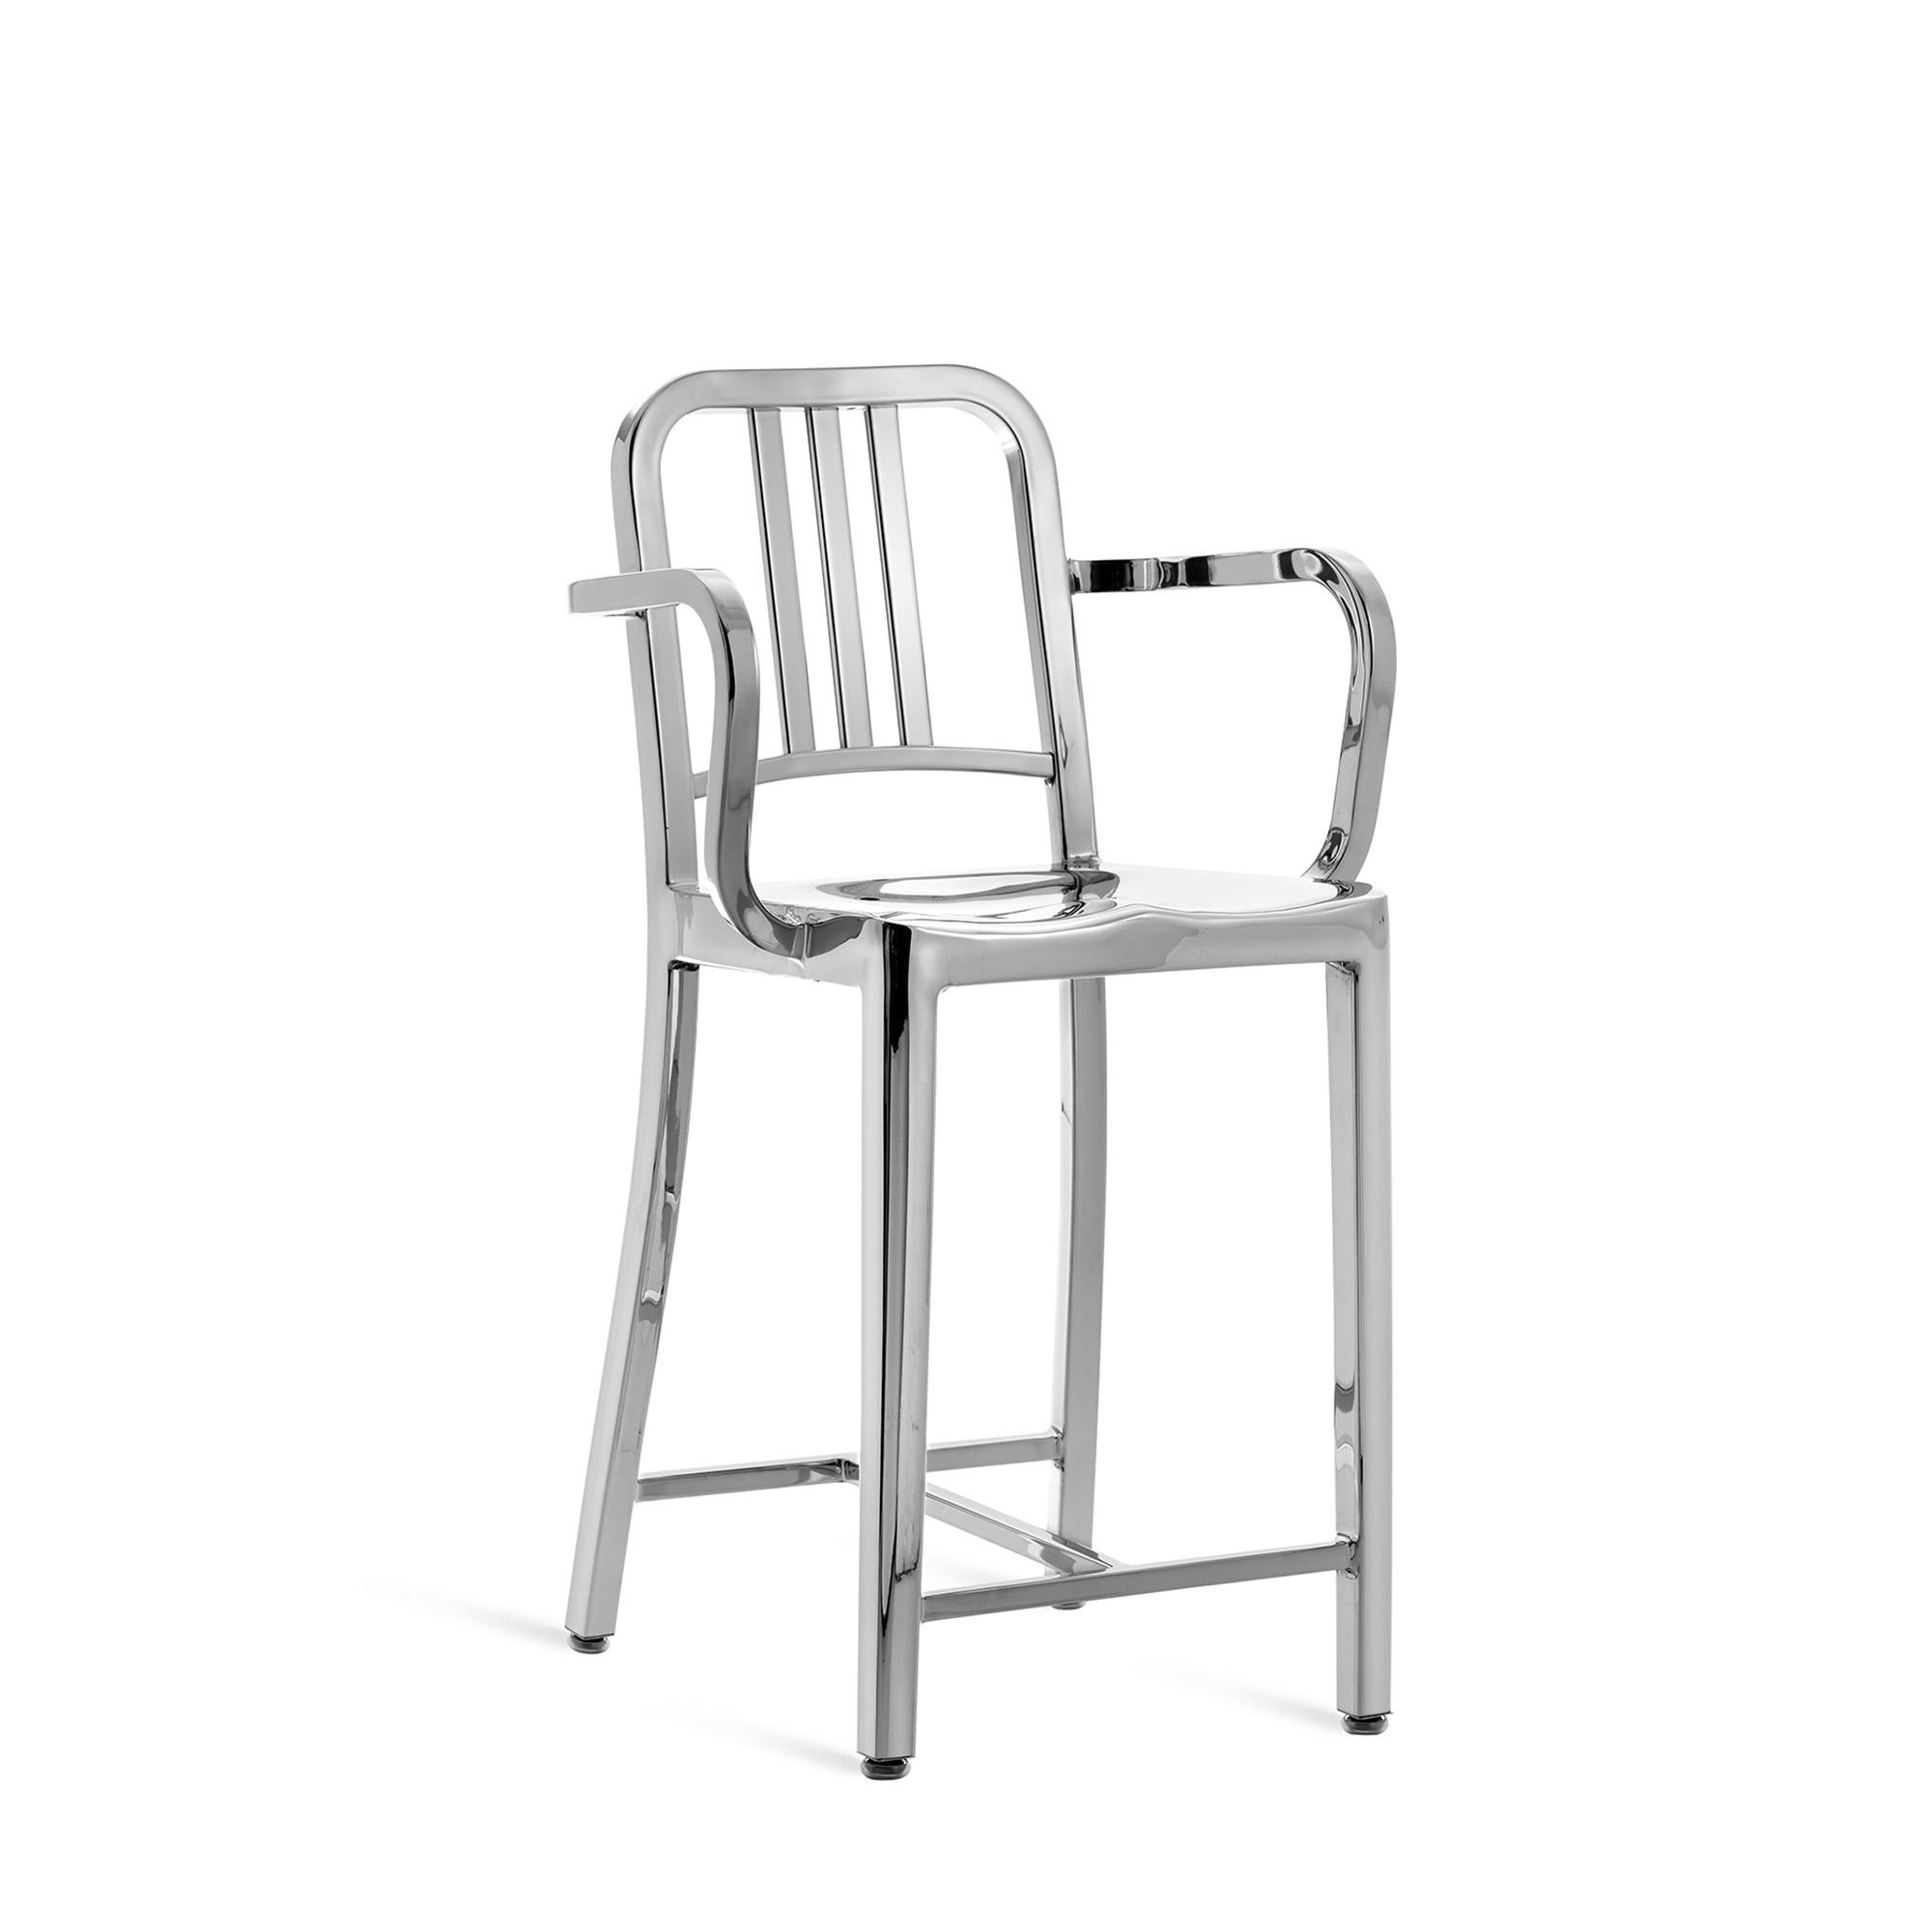 First built for use on submarines in 1944, the Navy chair has been in continuous production ever since. With the famous 77 step process, our craftsmen take soft, recycled aluminum, hand form and weld it- then temper it for strength. Finally, the